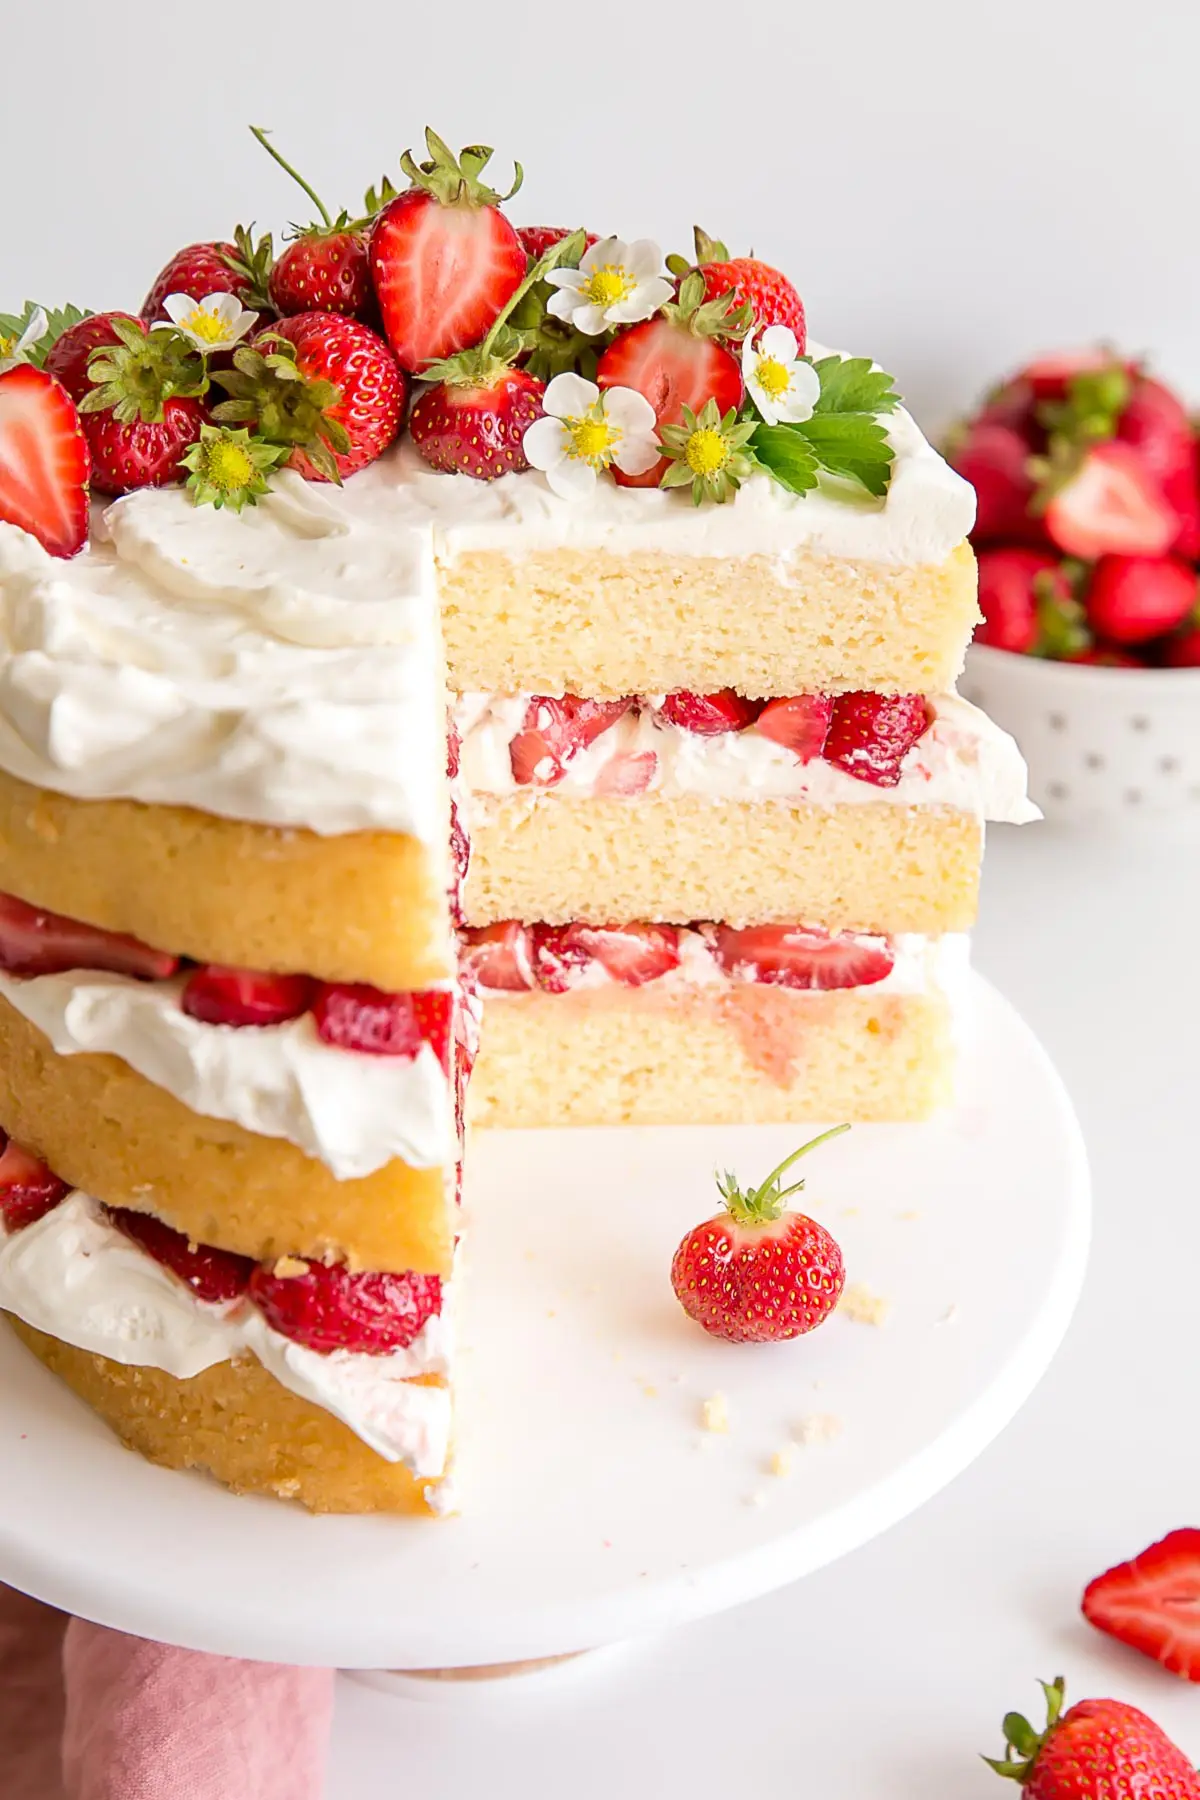 Angled cross section of a strawberry shortcake cake showing the layers.